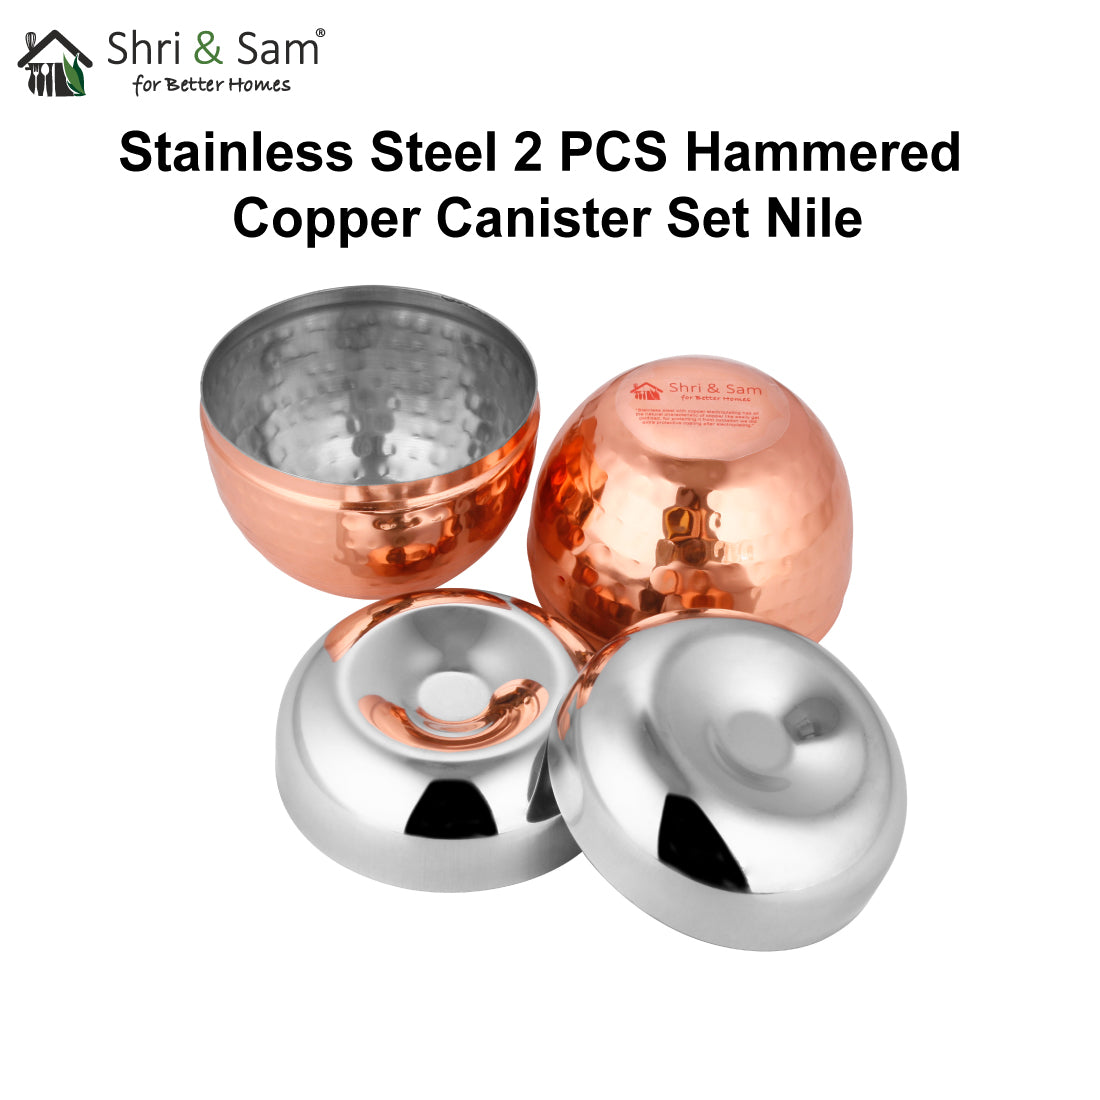 Stainless Steel 2 PCS Hammered Copper Canister Set Nile